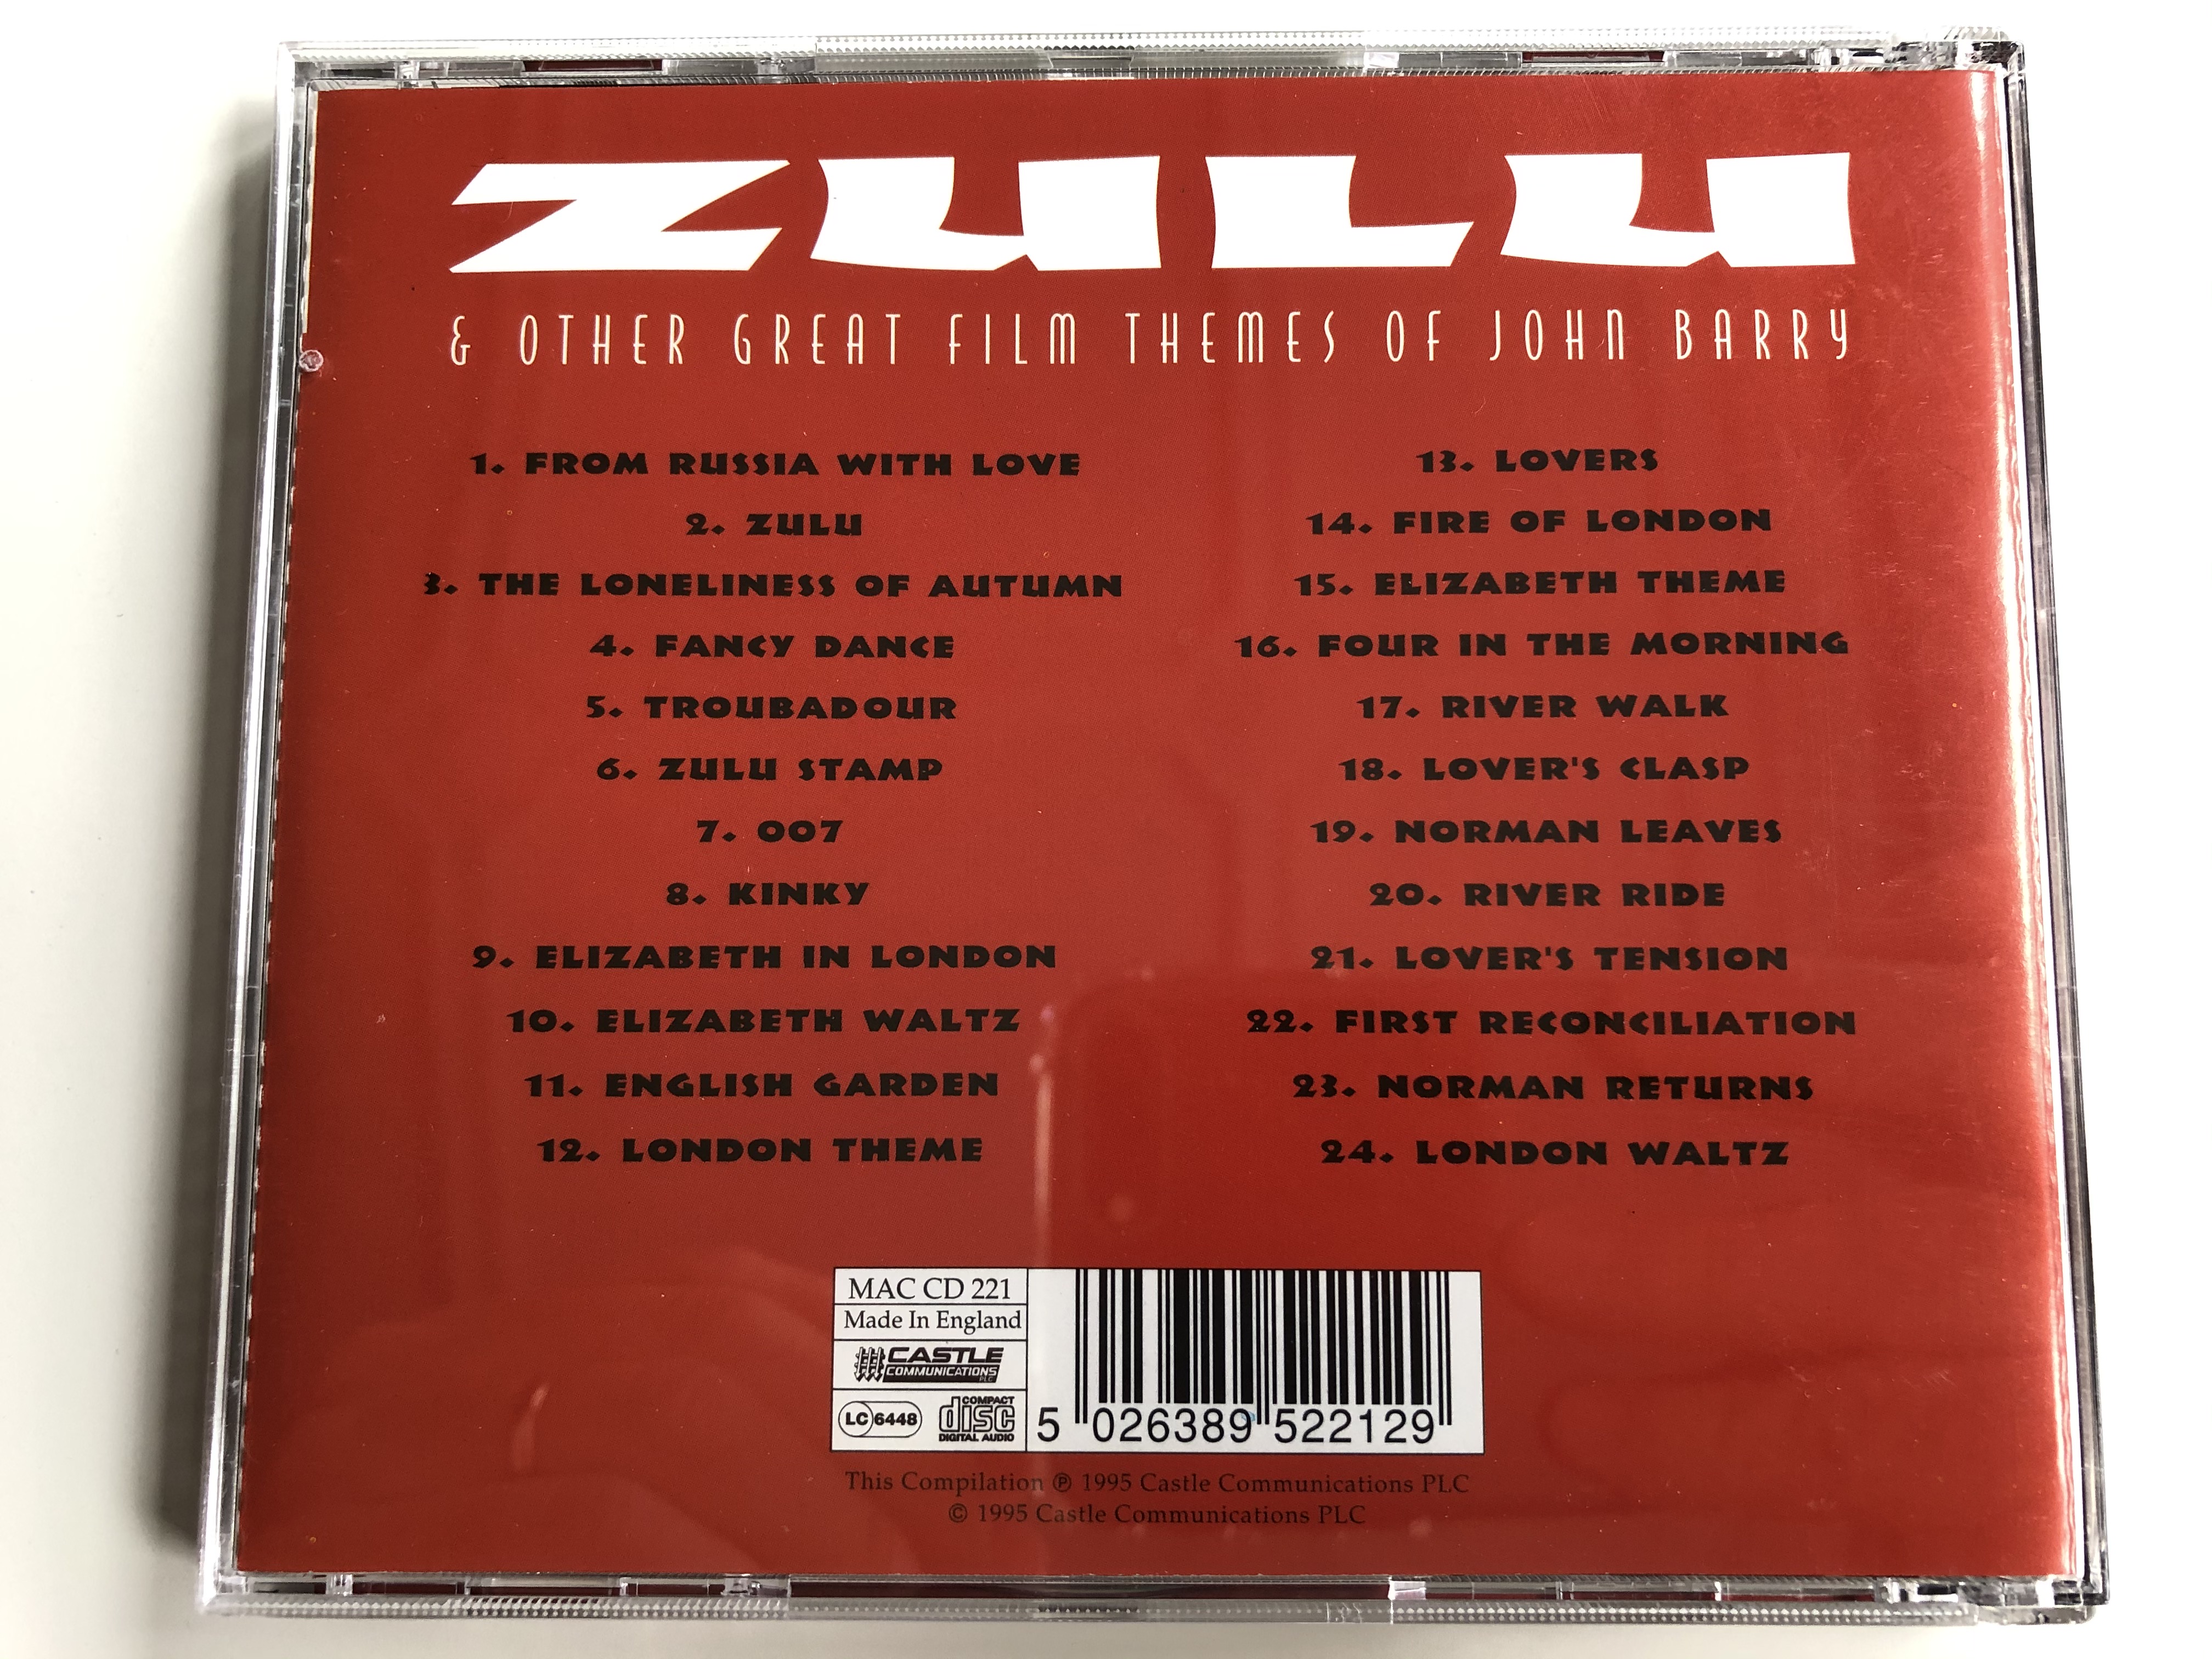 zulu-other-great-film-themes-of-john-barry-zulu-stamp-from-russia-with-love-zulu-007-elizabeth-theme-four-in-the-morning-norman-returns-castle-communications-audio-cd-1995-mac-cd-3-.jpg